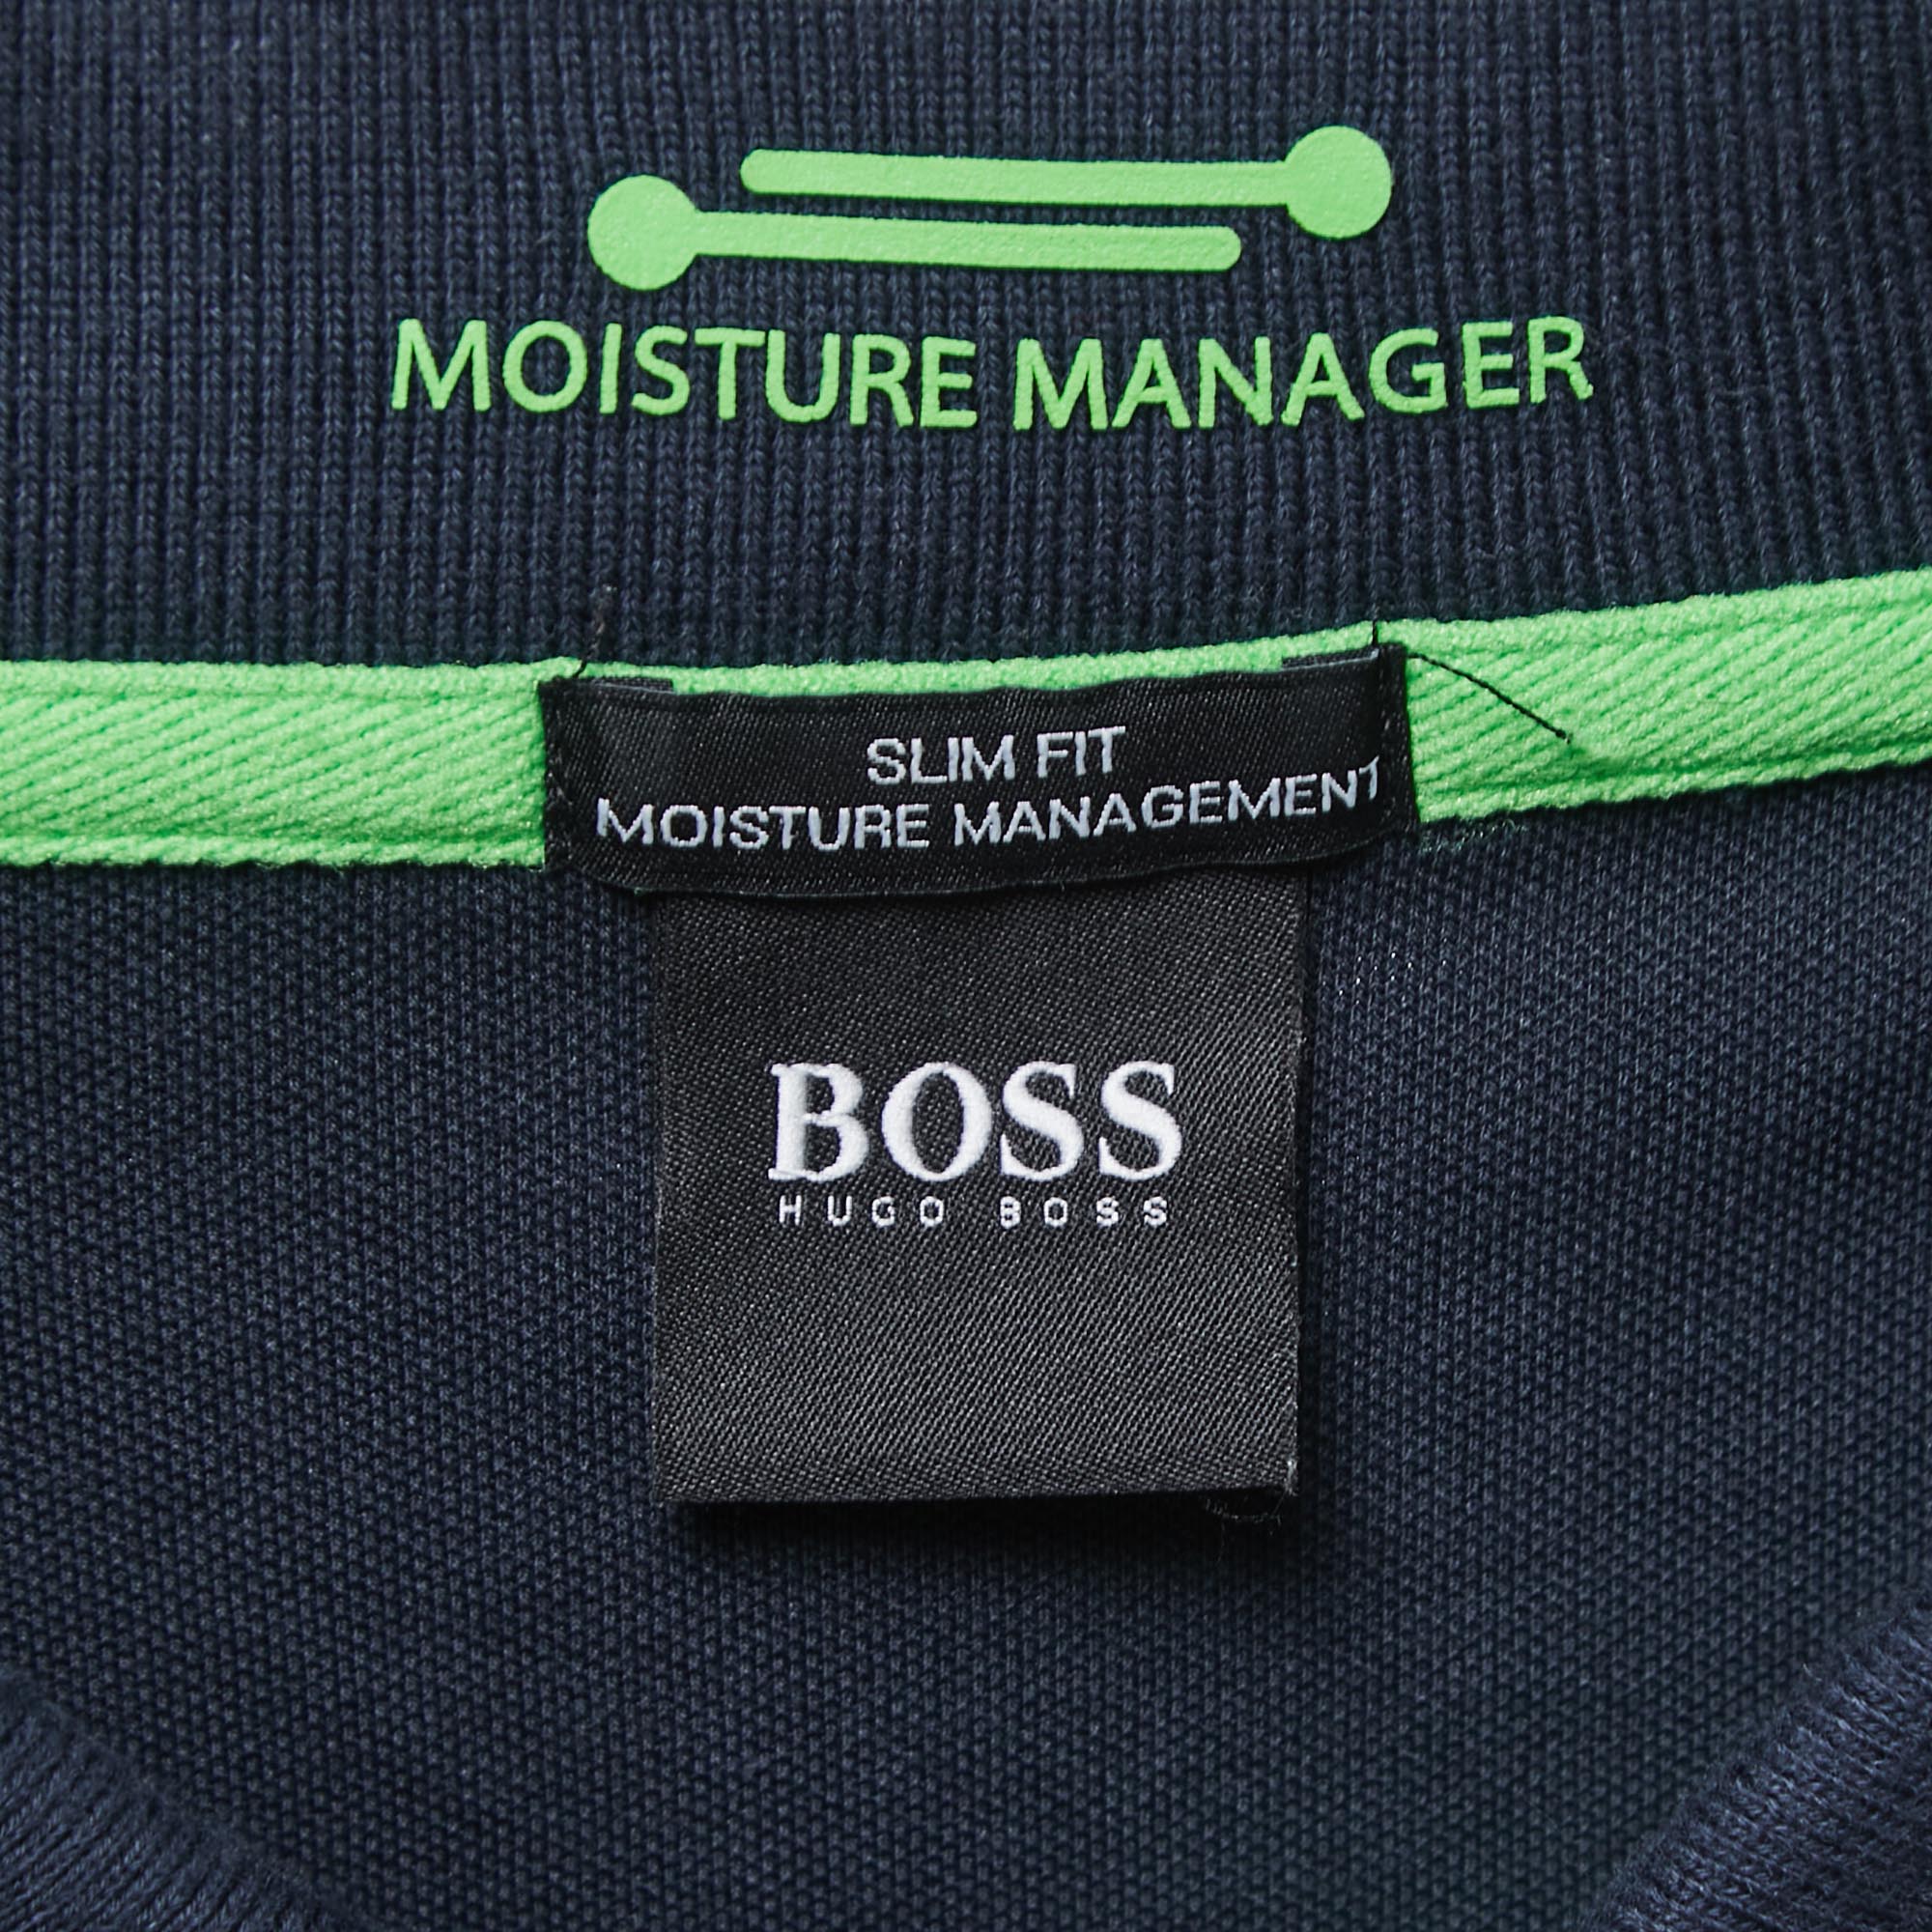 Boss By Hugo Boss Navy Blue Cotton Pique Moisture Manager Slim Fit Polo T-Shirt L